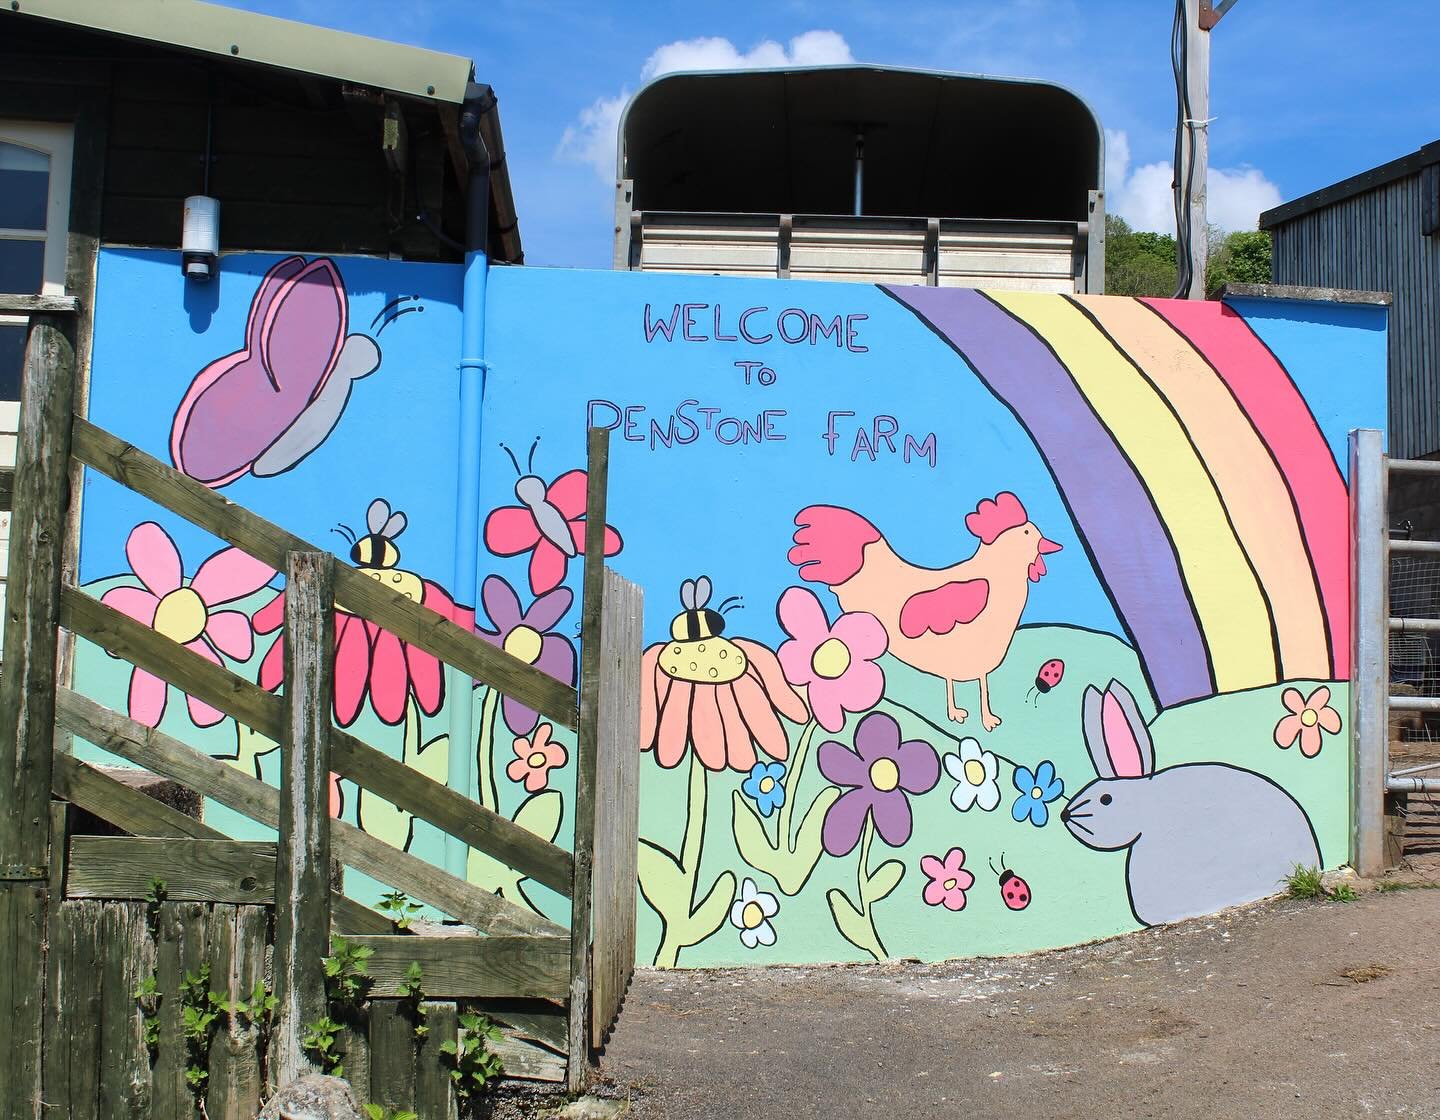 🌈 Look at this!🌈 a huge thank you to our teacher Adele and all of Lavender Adults class who have spent many hours on this beautiful mural. We LOVE it and the colour that it brings to the farm. What do you think? 🐝 🦋 🐔 🌷 🐇 🐞